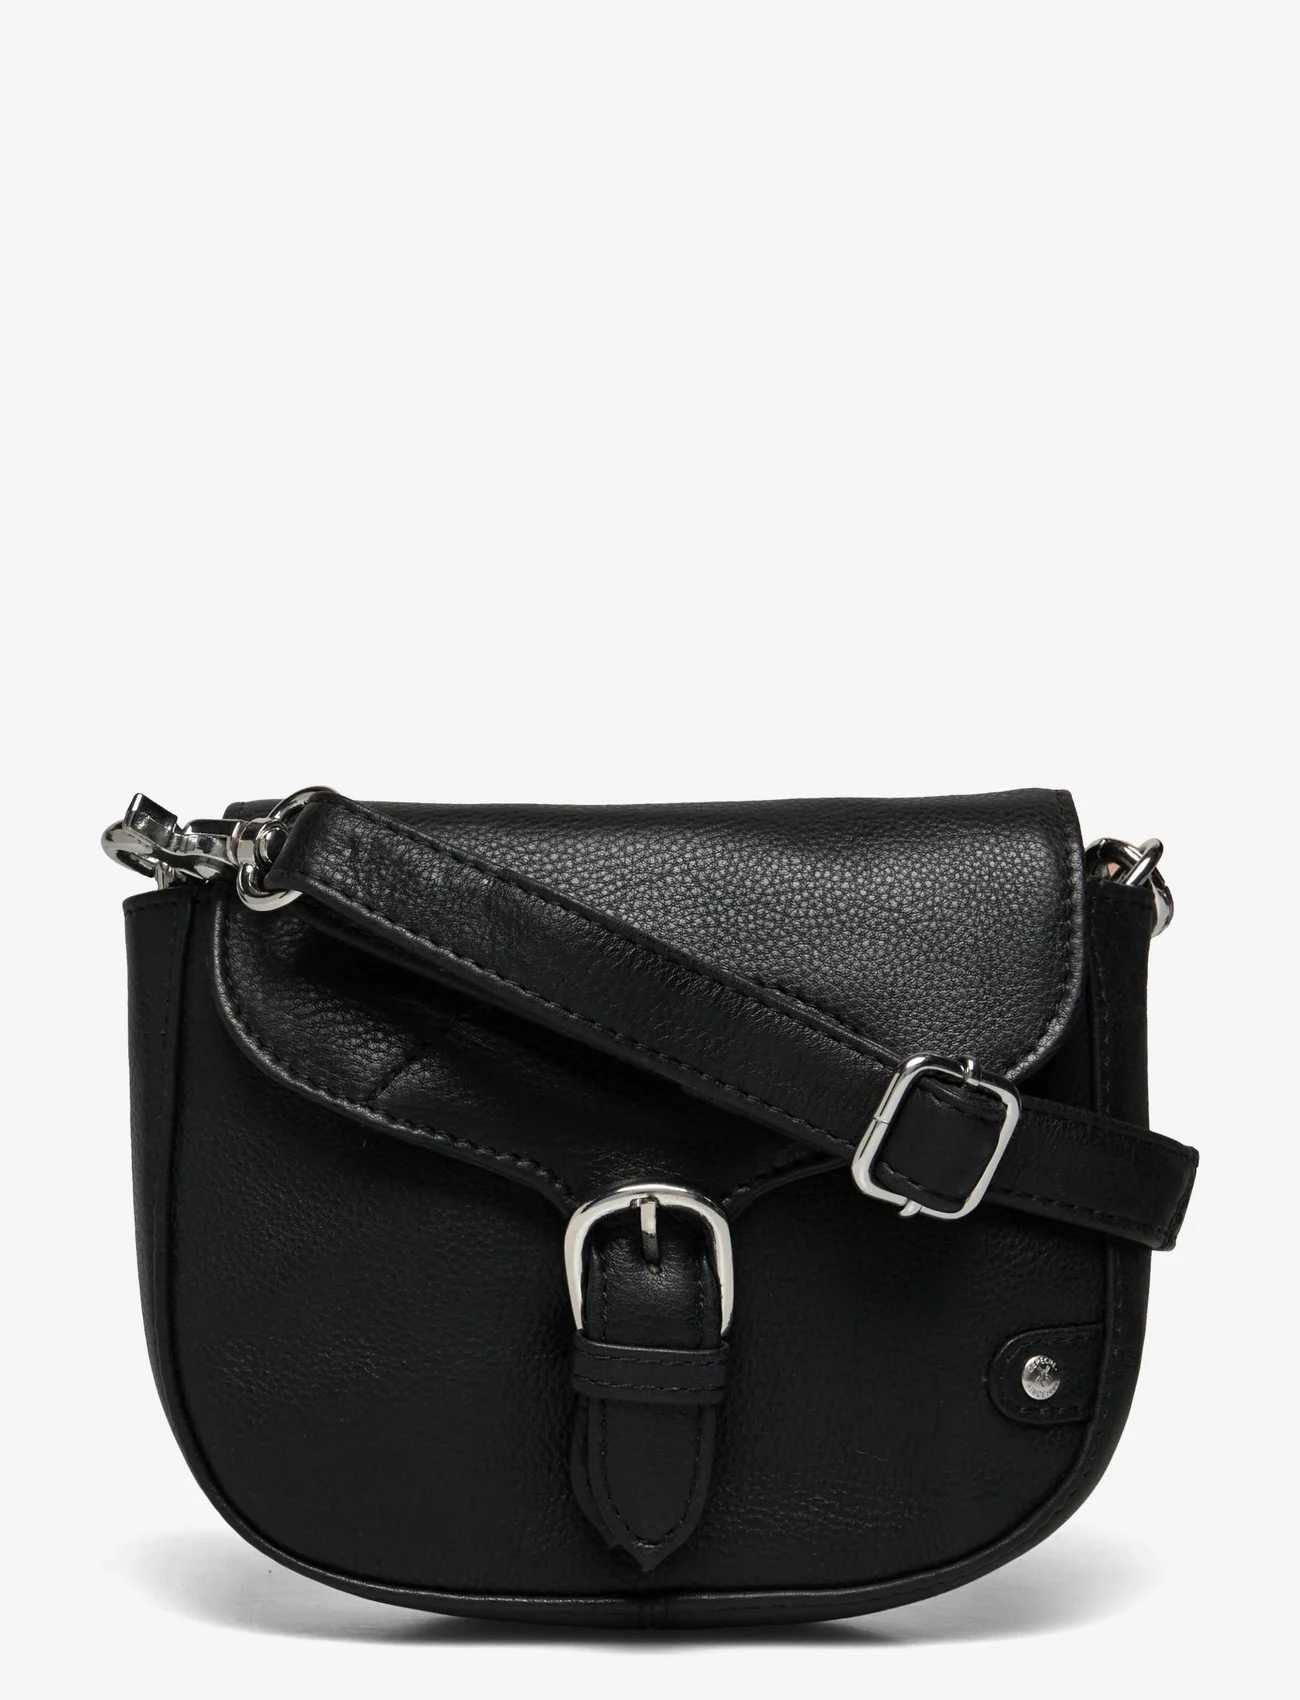 DEPECHE - Small bag / Clutch - peoriided outlet-hindadega - 099 black (nero) - 0